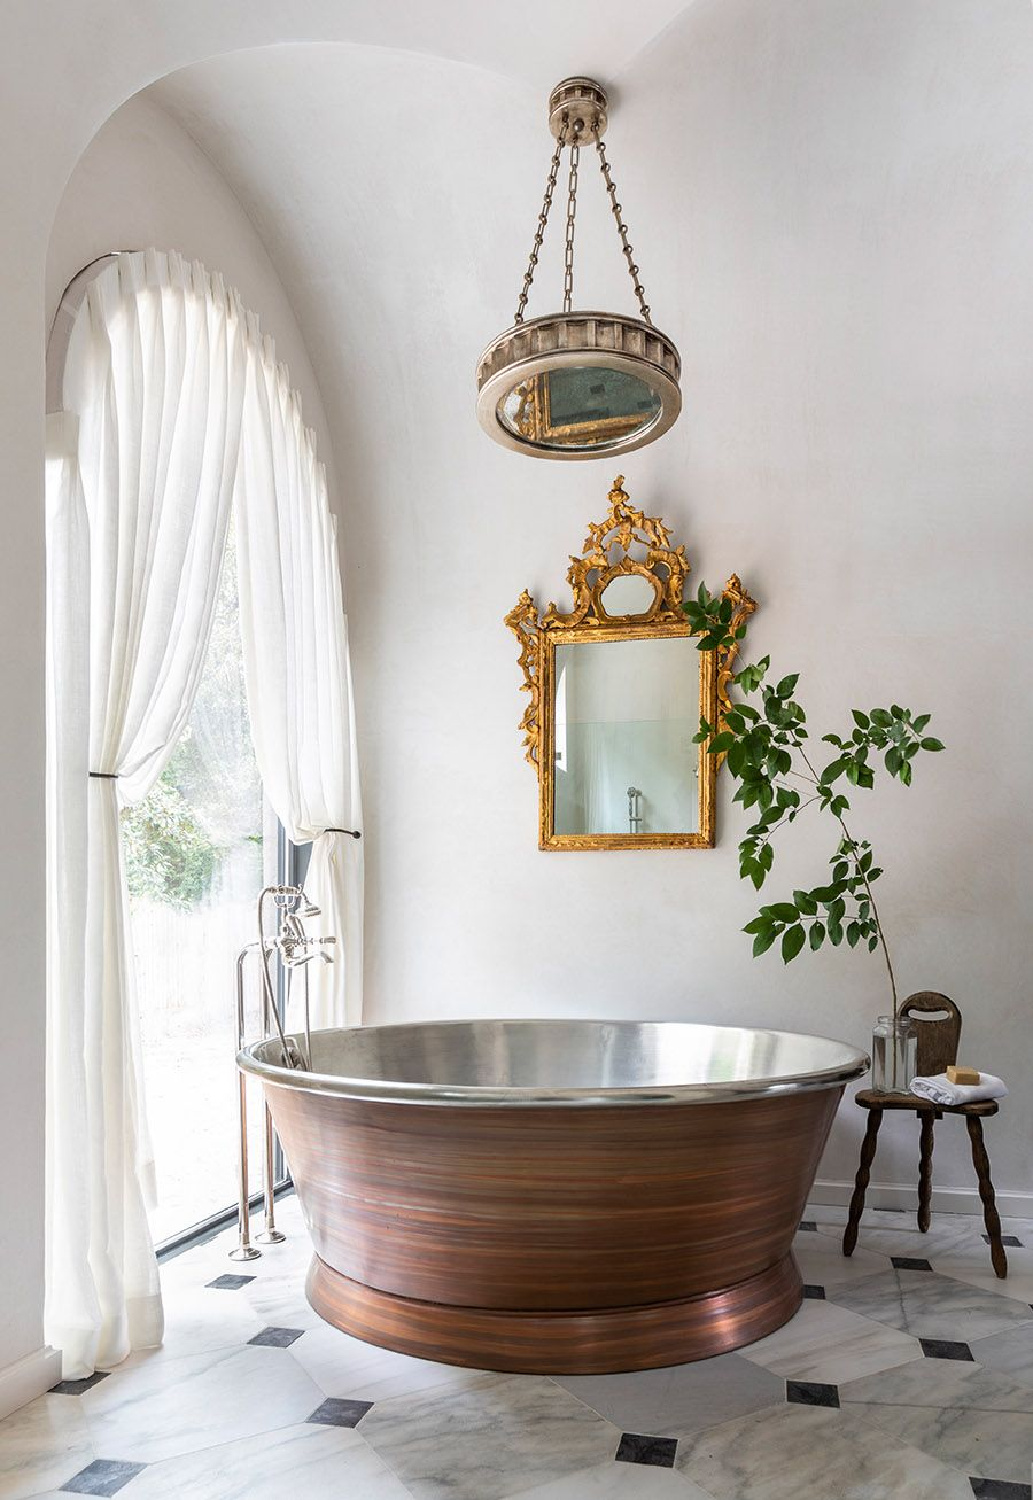 Timeless bath design in Marie Flanigan's THE BEAUTY OF HOME: Redefining Traditional Interiors (Gibbs Smith, 2020)